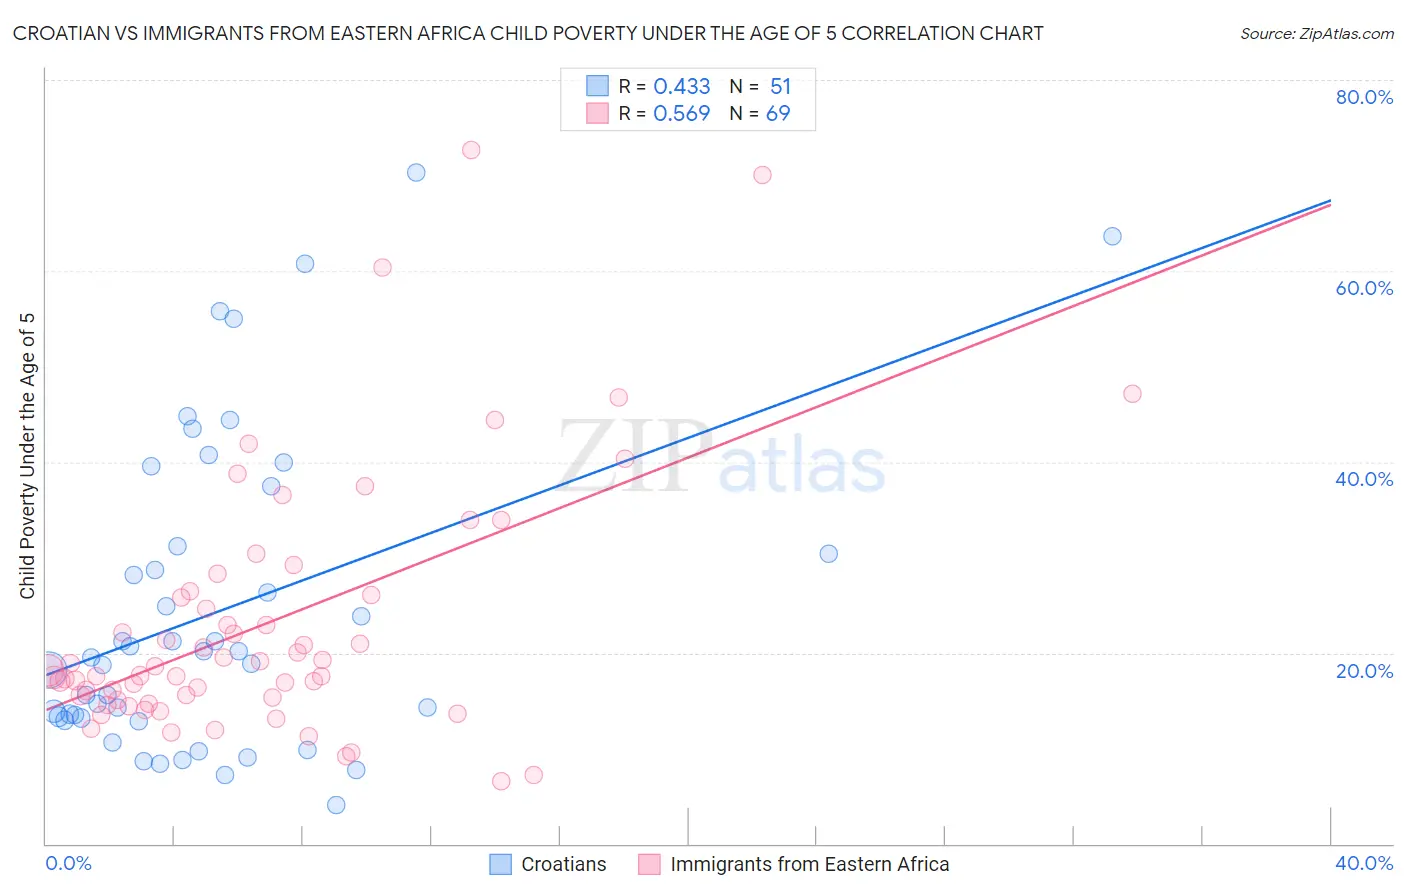 Croatian vs Immigrants from Eastern Africa Child Poverty Under the Age of 5